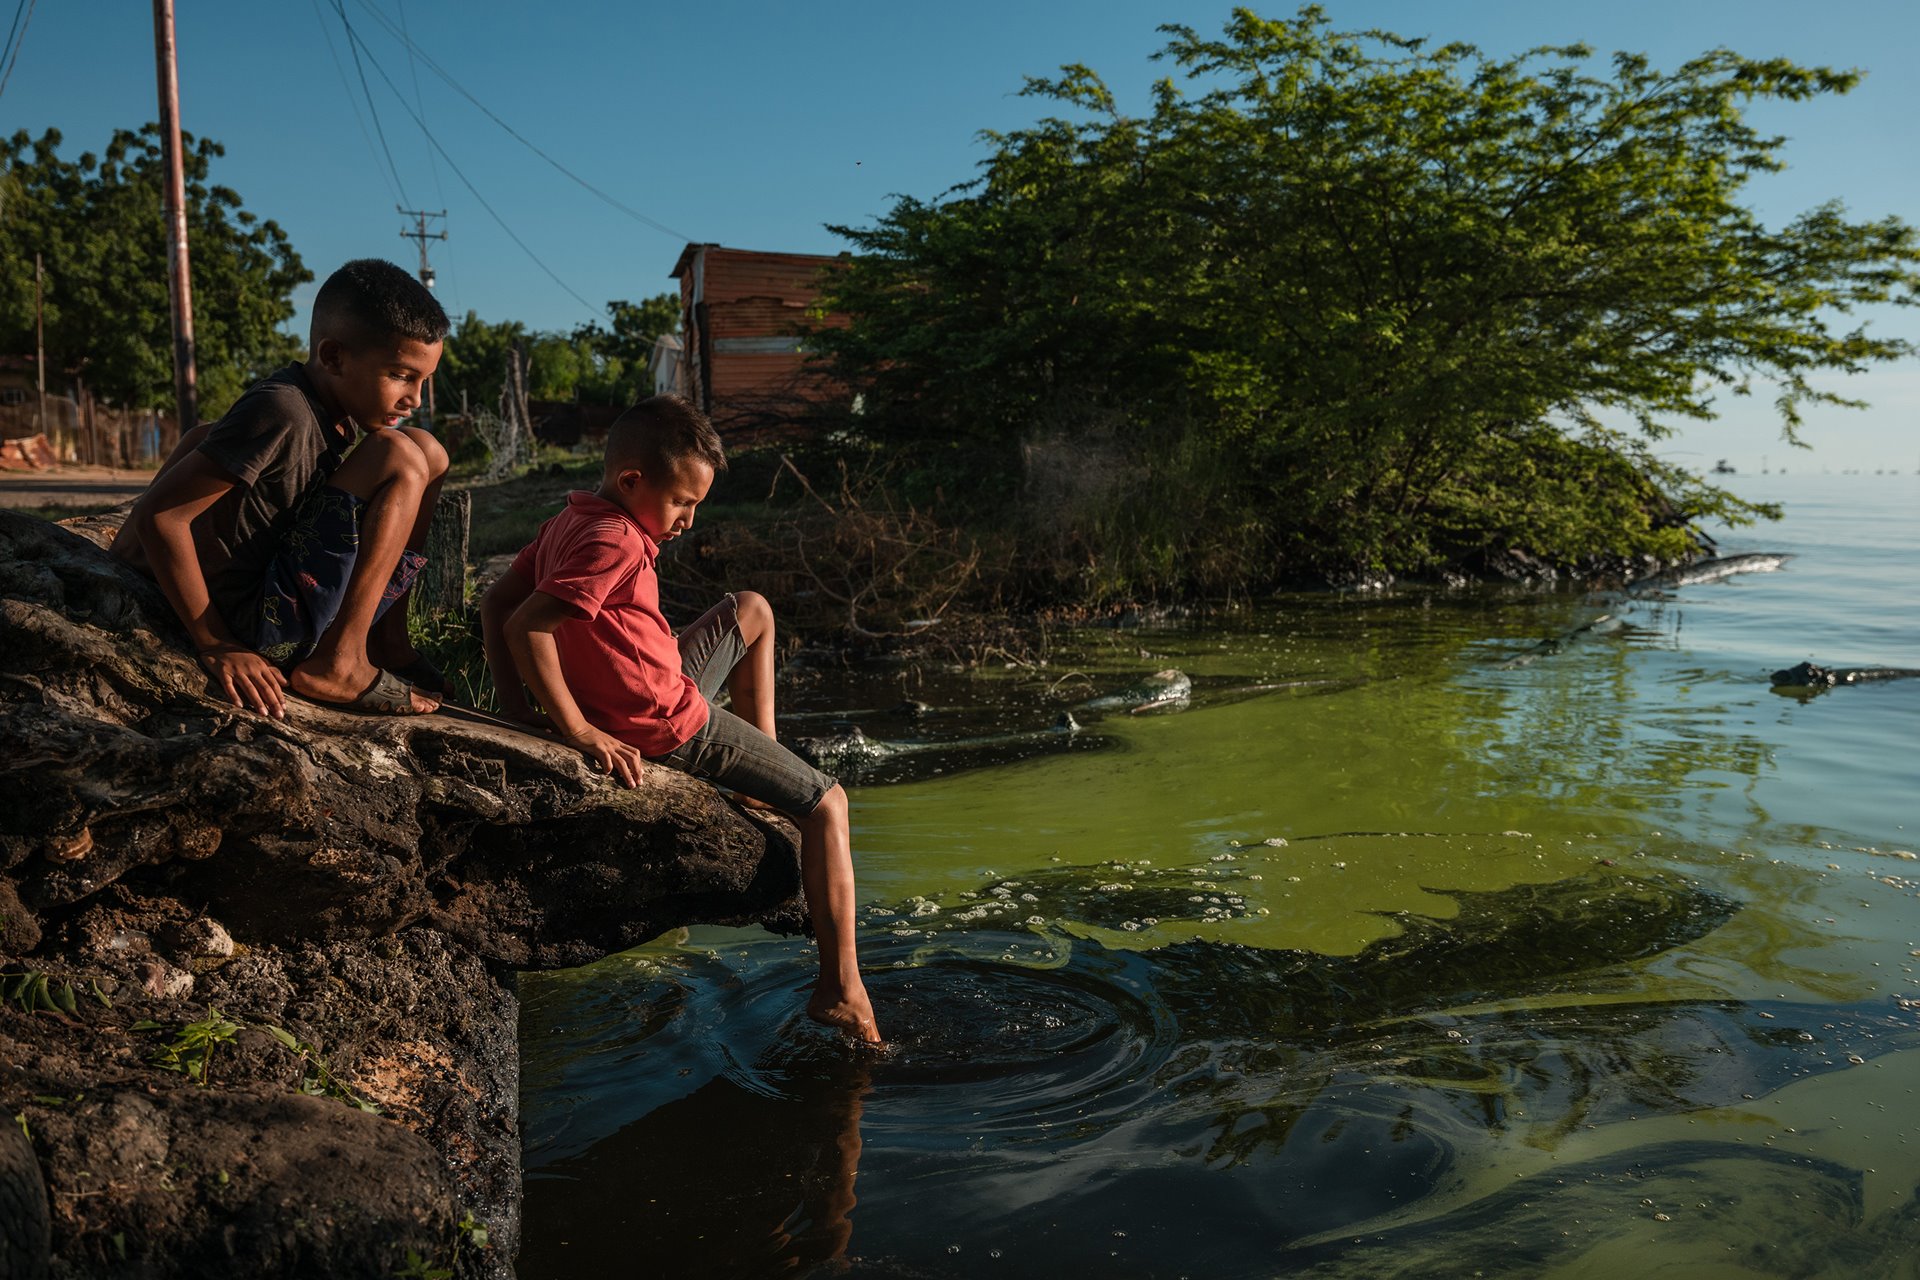 Luis Javier (9) and Luis David (8) play on the shores of Lake Maracaibo, Cabimas, Venezuela, which is stained with algae and crude oil. The nation&#39;s largest oil fields are located around and beneath Lake Maracaibo. Along with oil slicks, the lake has become covered with algae caused by discharged fertilizers, sewage, and other chemicals.&nbsp;